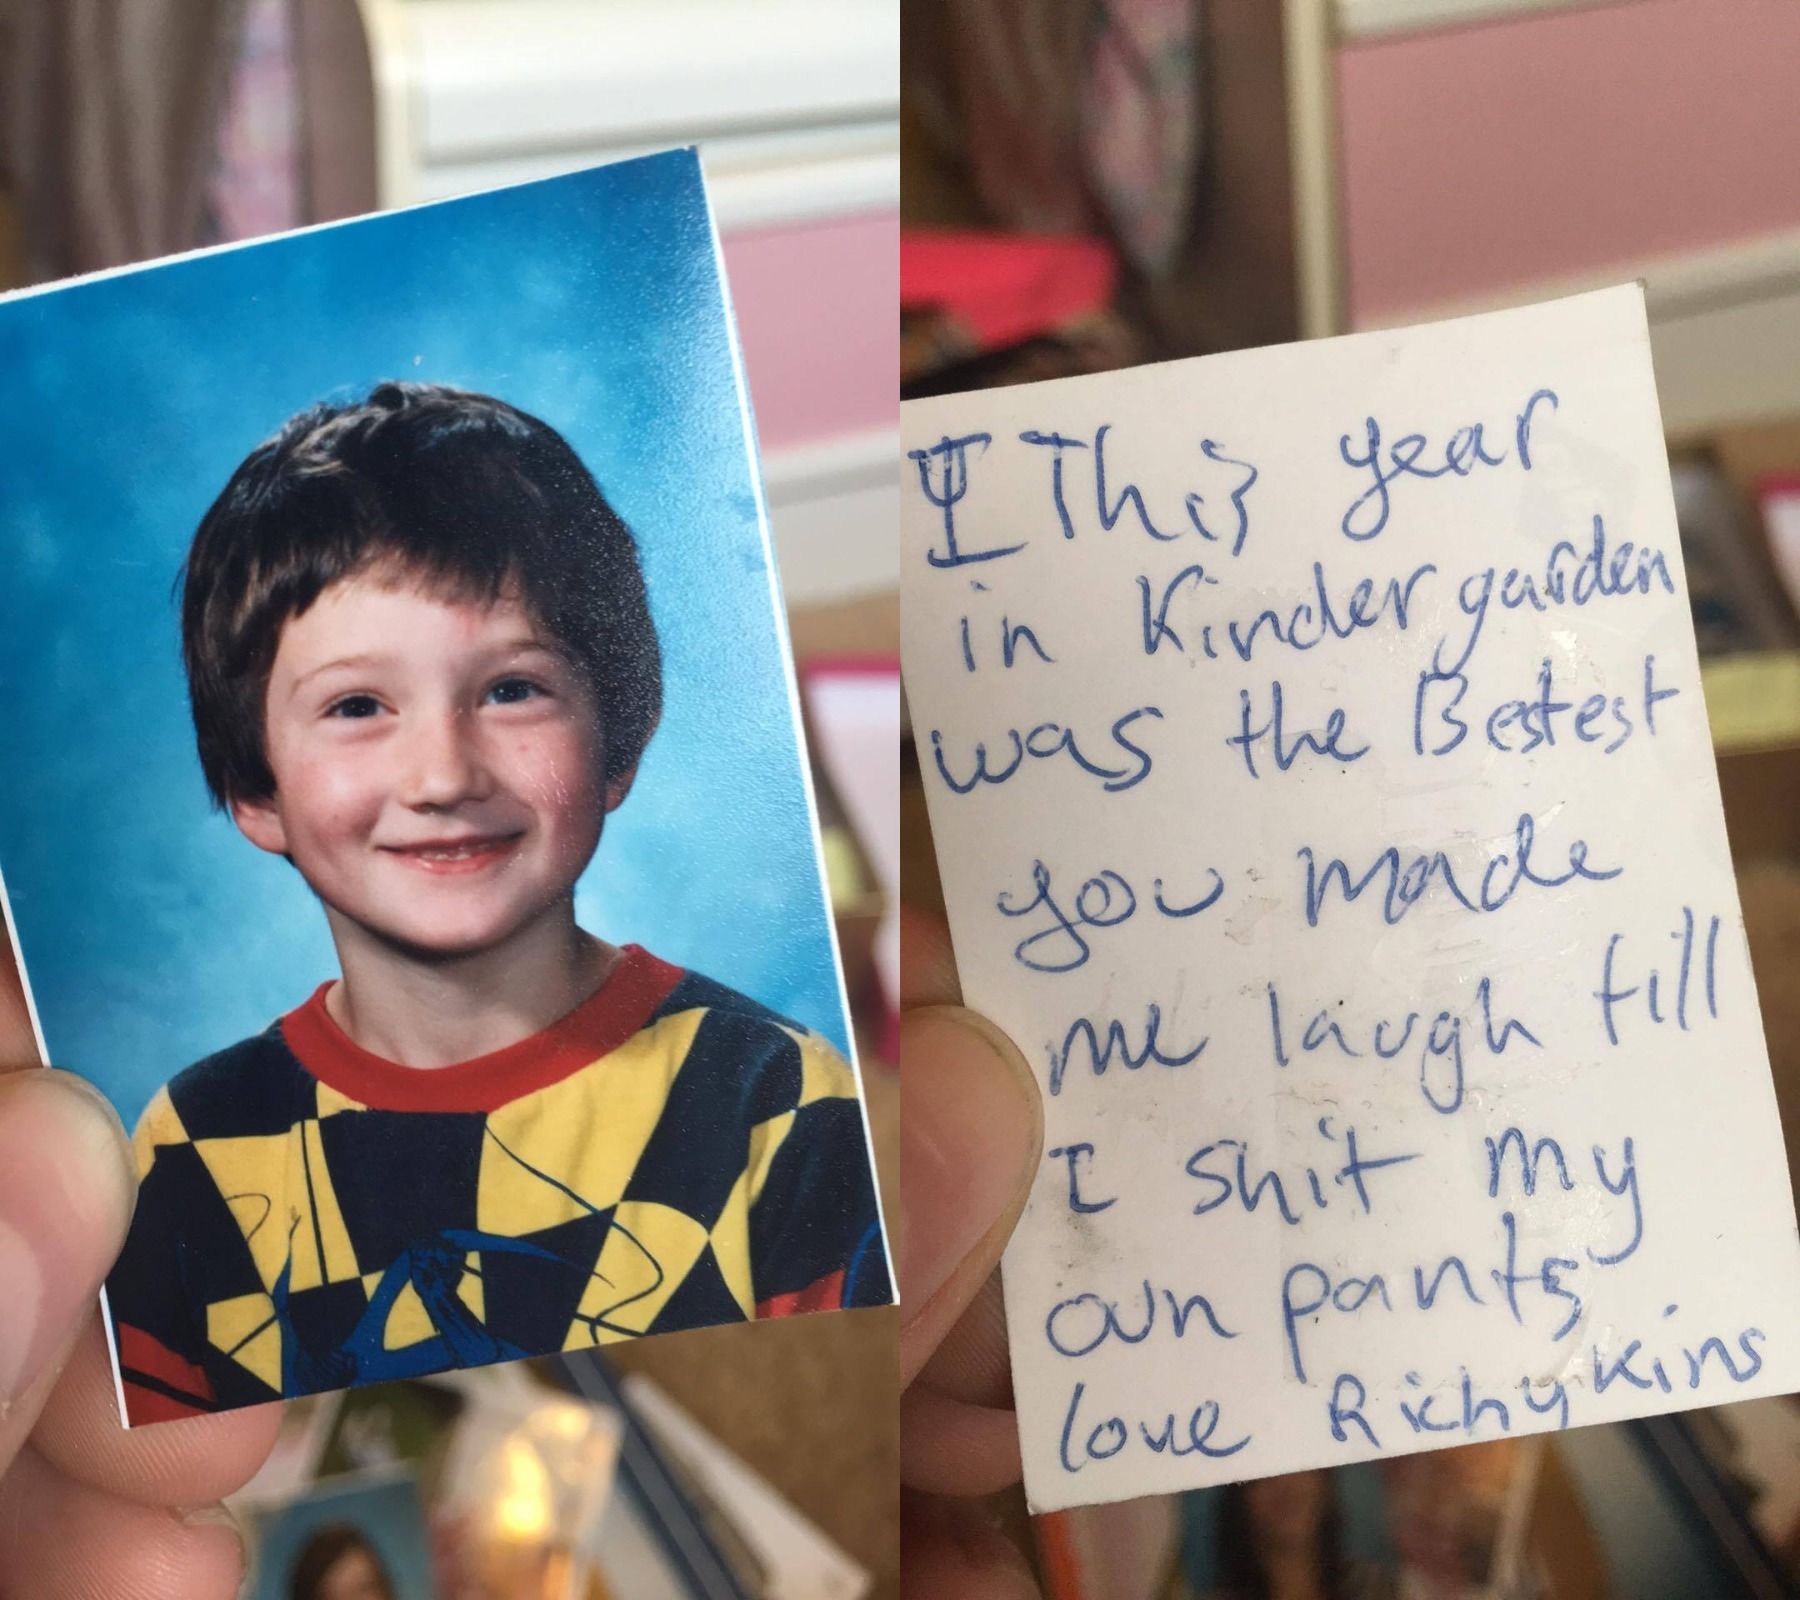 My friend found a photo I gave her in kindergarten. My older brother helped me write the note .